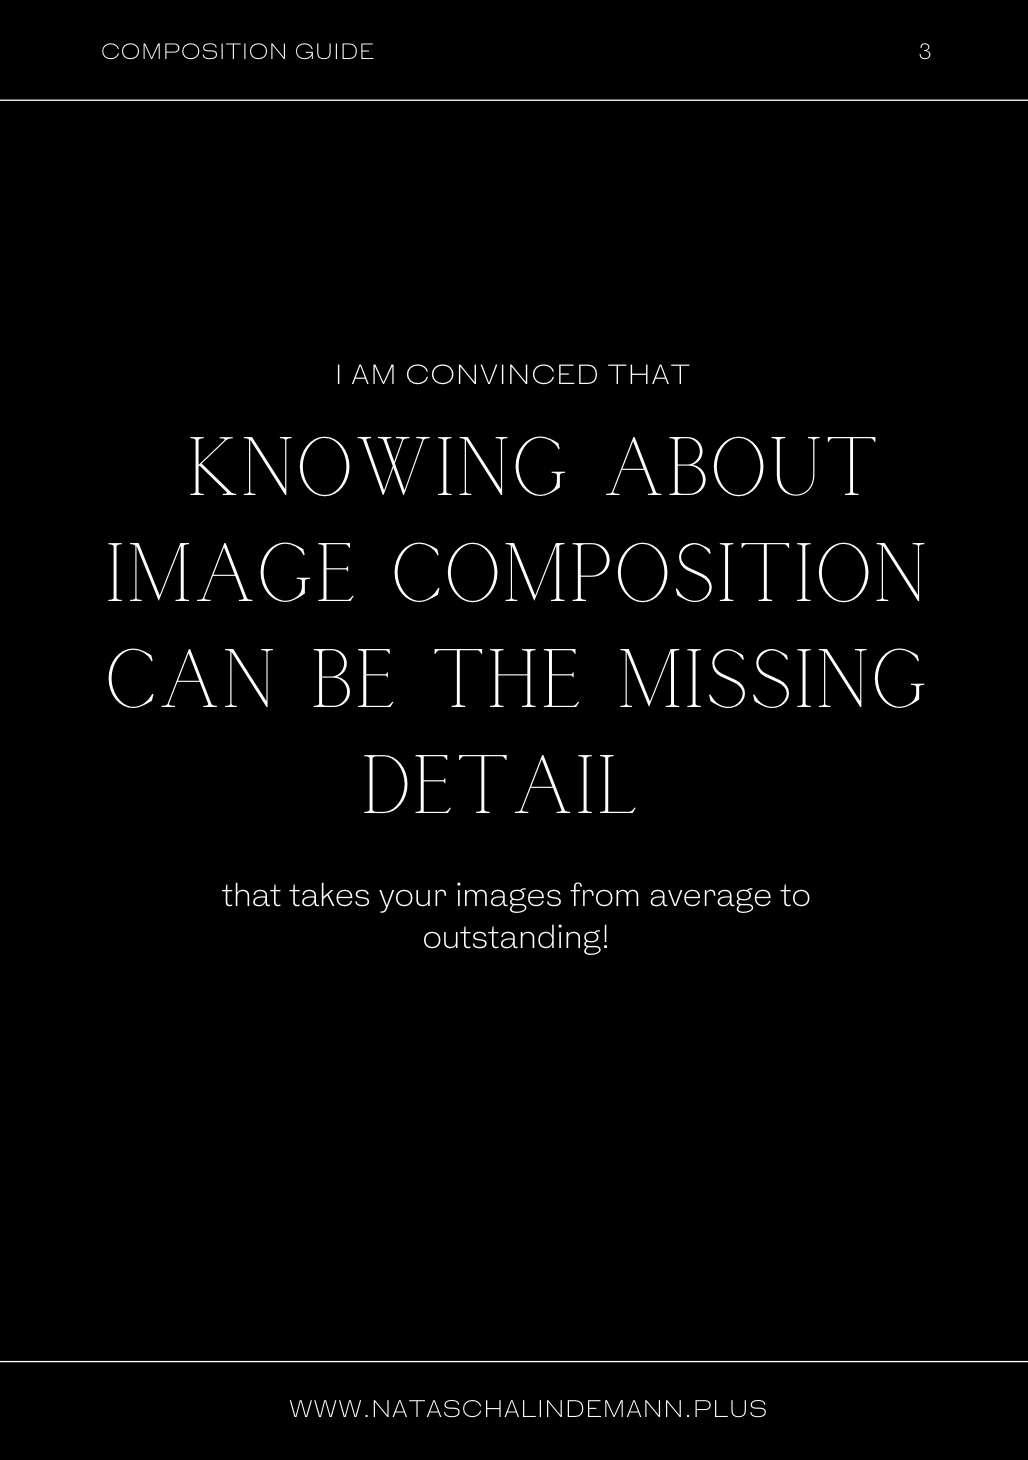 Natascha Lindemann - My Composition Rules for Beauty Photographer - Page 4 - Knowing about image composition - PDF Guide